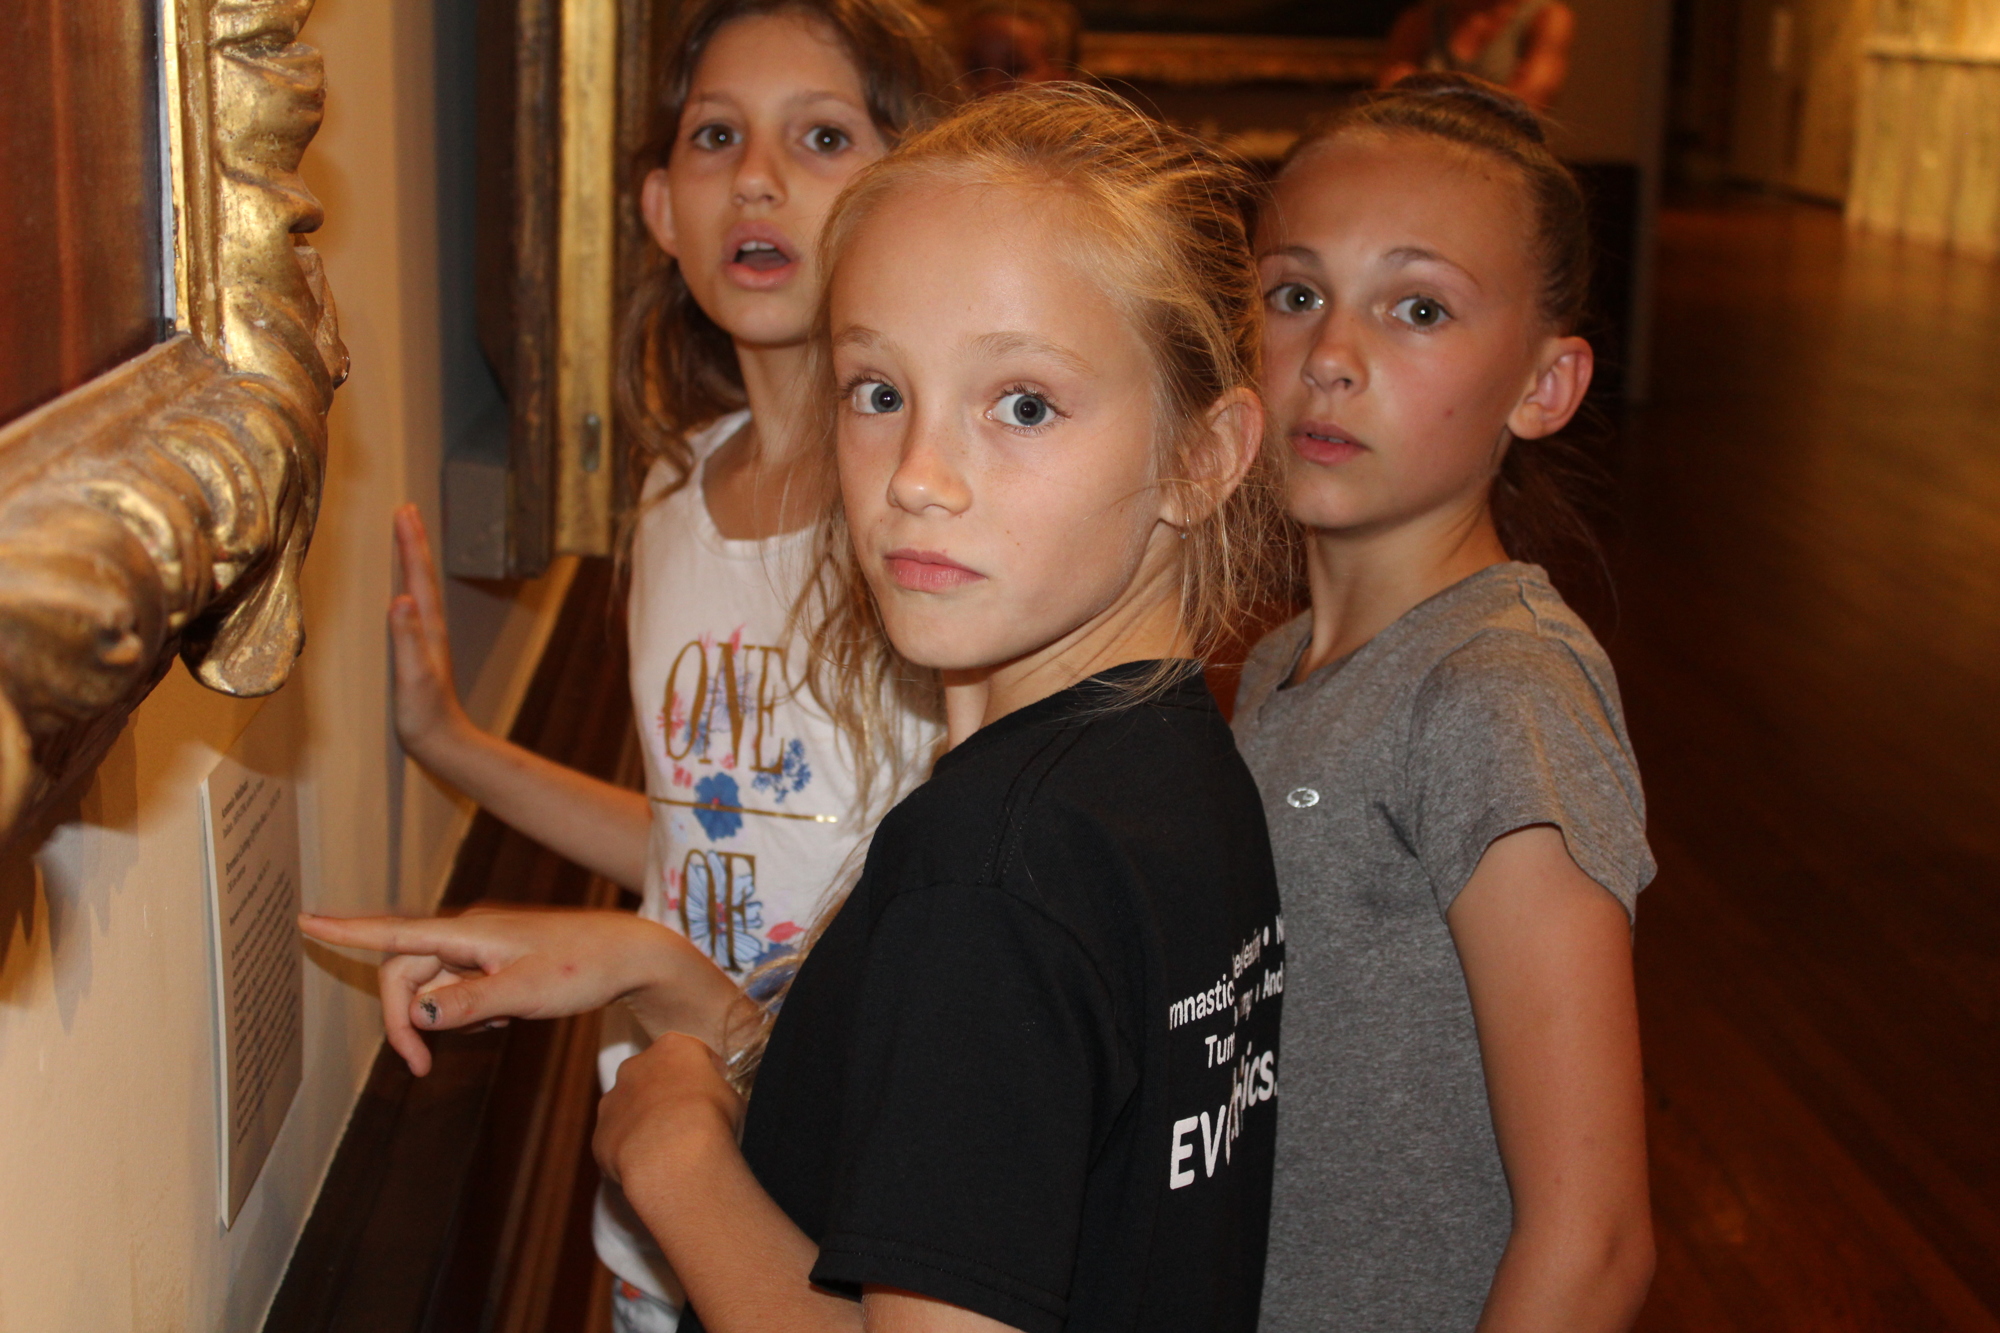 Front to back. Braden River Elementary School fourth graders Rose Reece, Nadia Benko and Cora Augustine examine a painting in the Ringling Museum of Art.